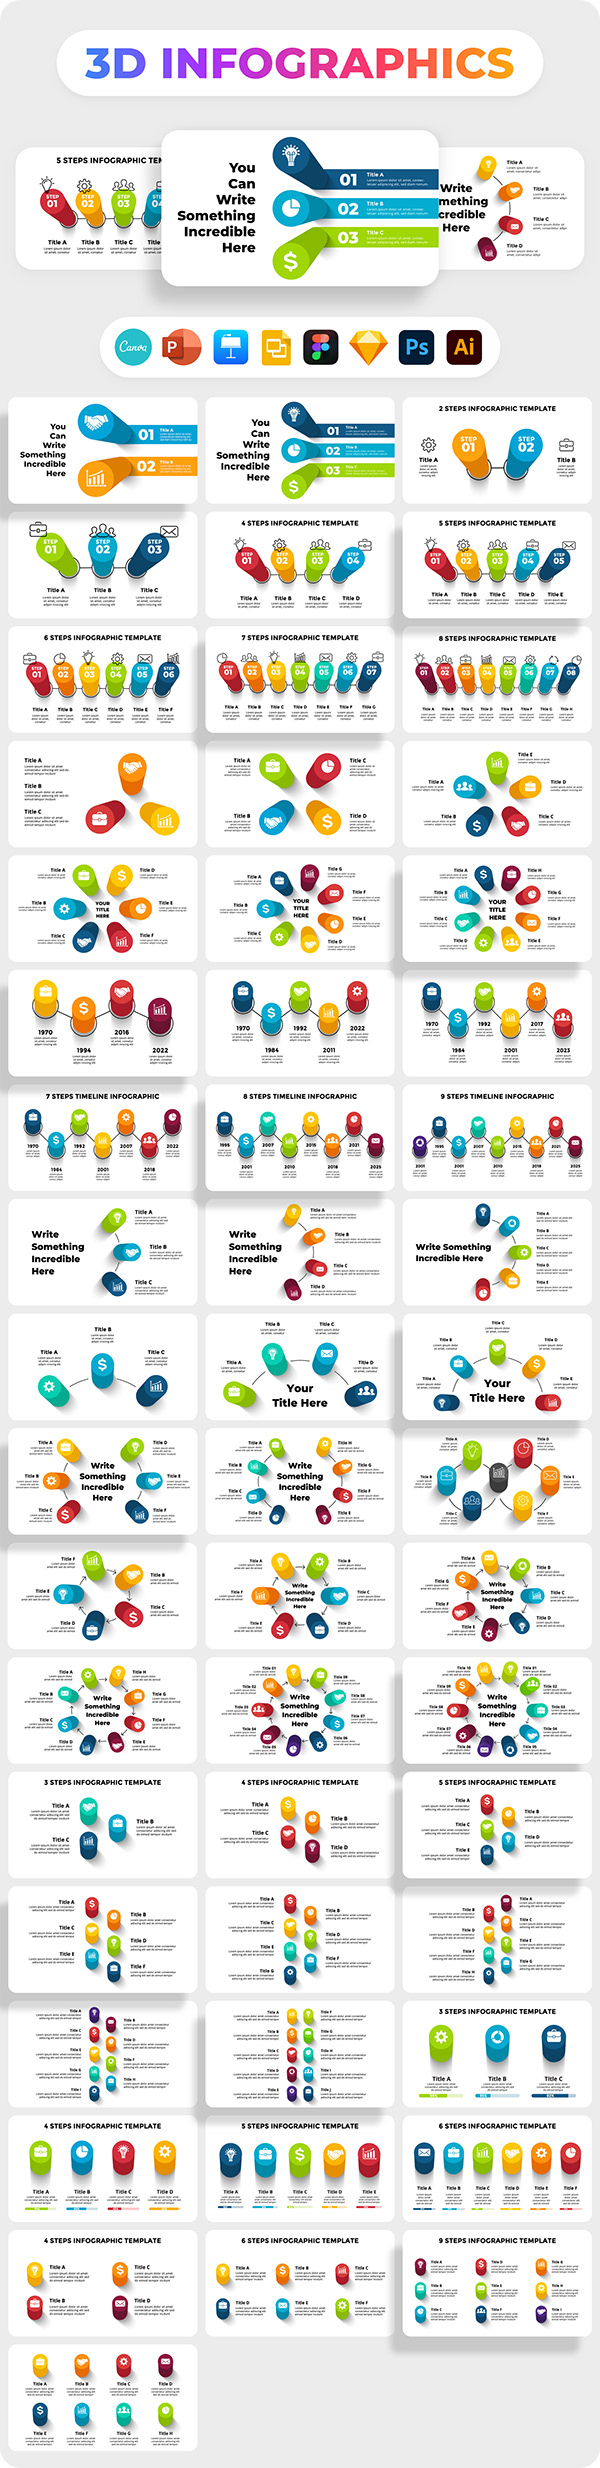 FREE 3D Infographic. PowerPoint Presentation Template.